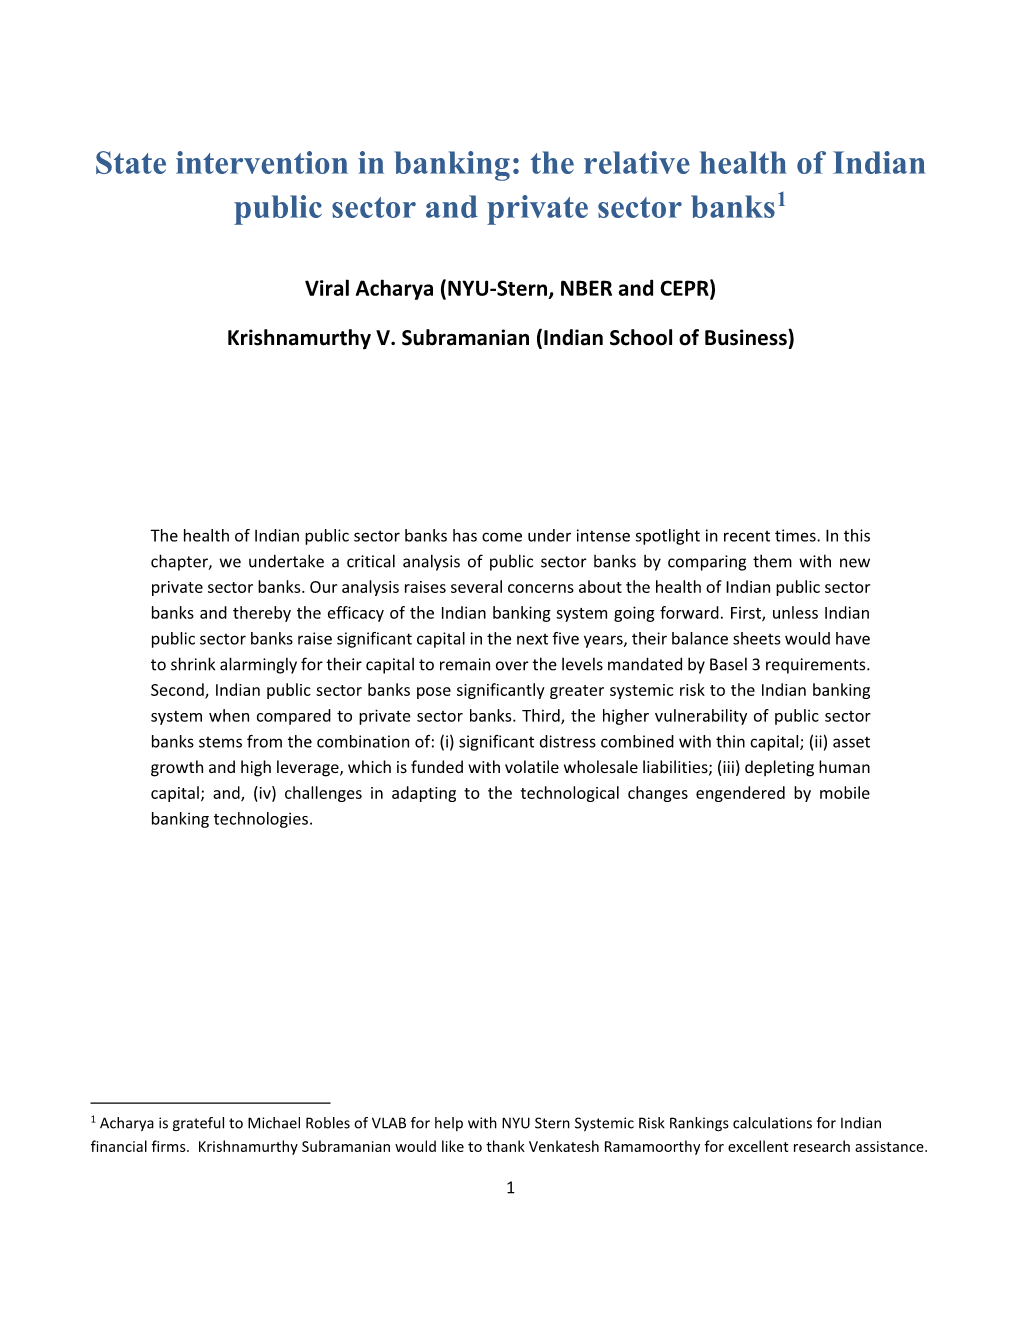 State Intervention in Banking: the Relative Health of Indian Public Sector and Private Sector Banks1